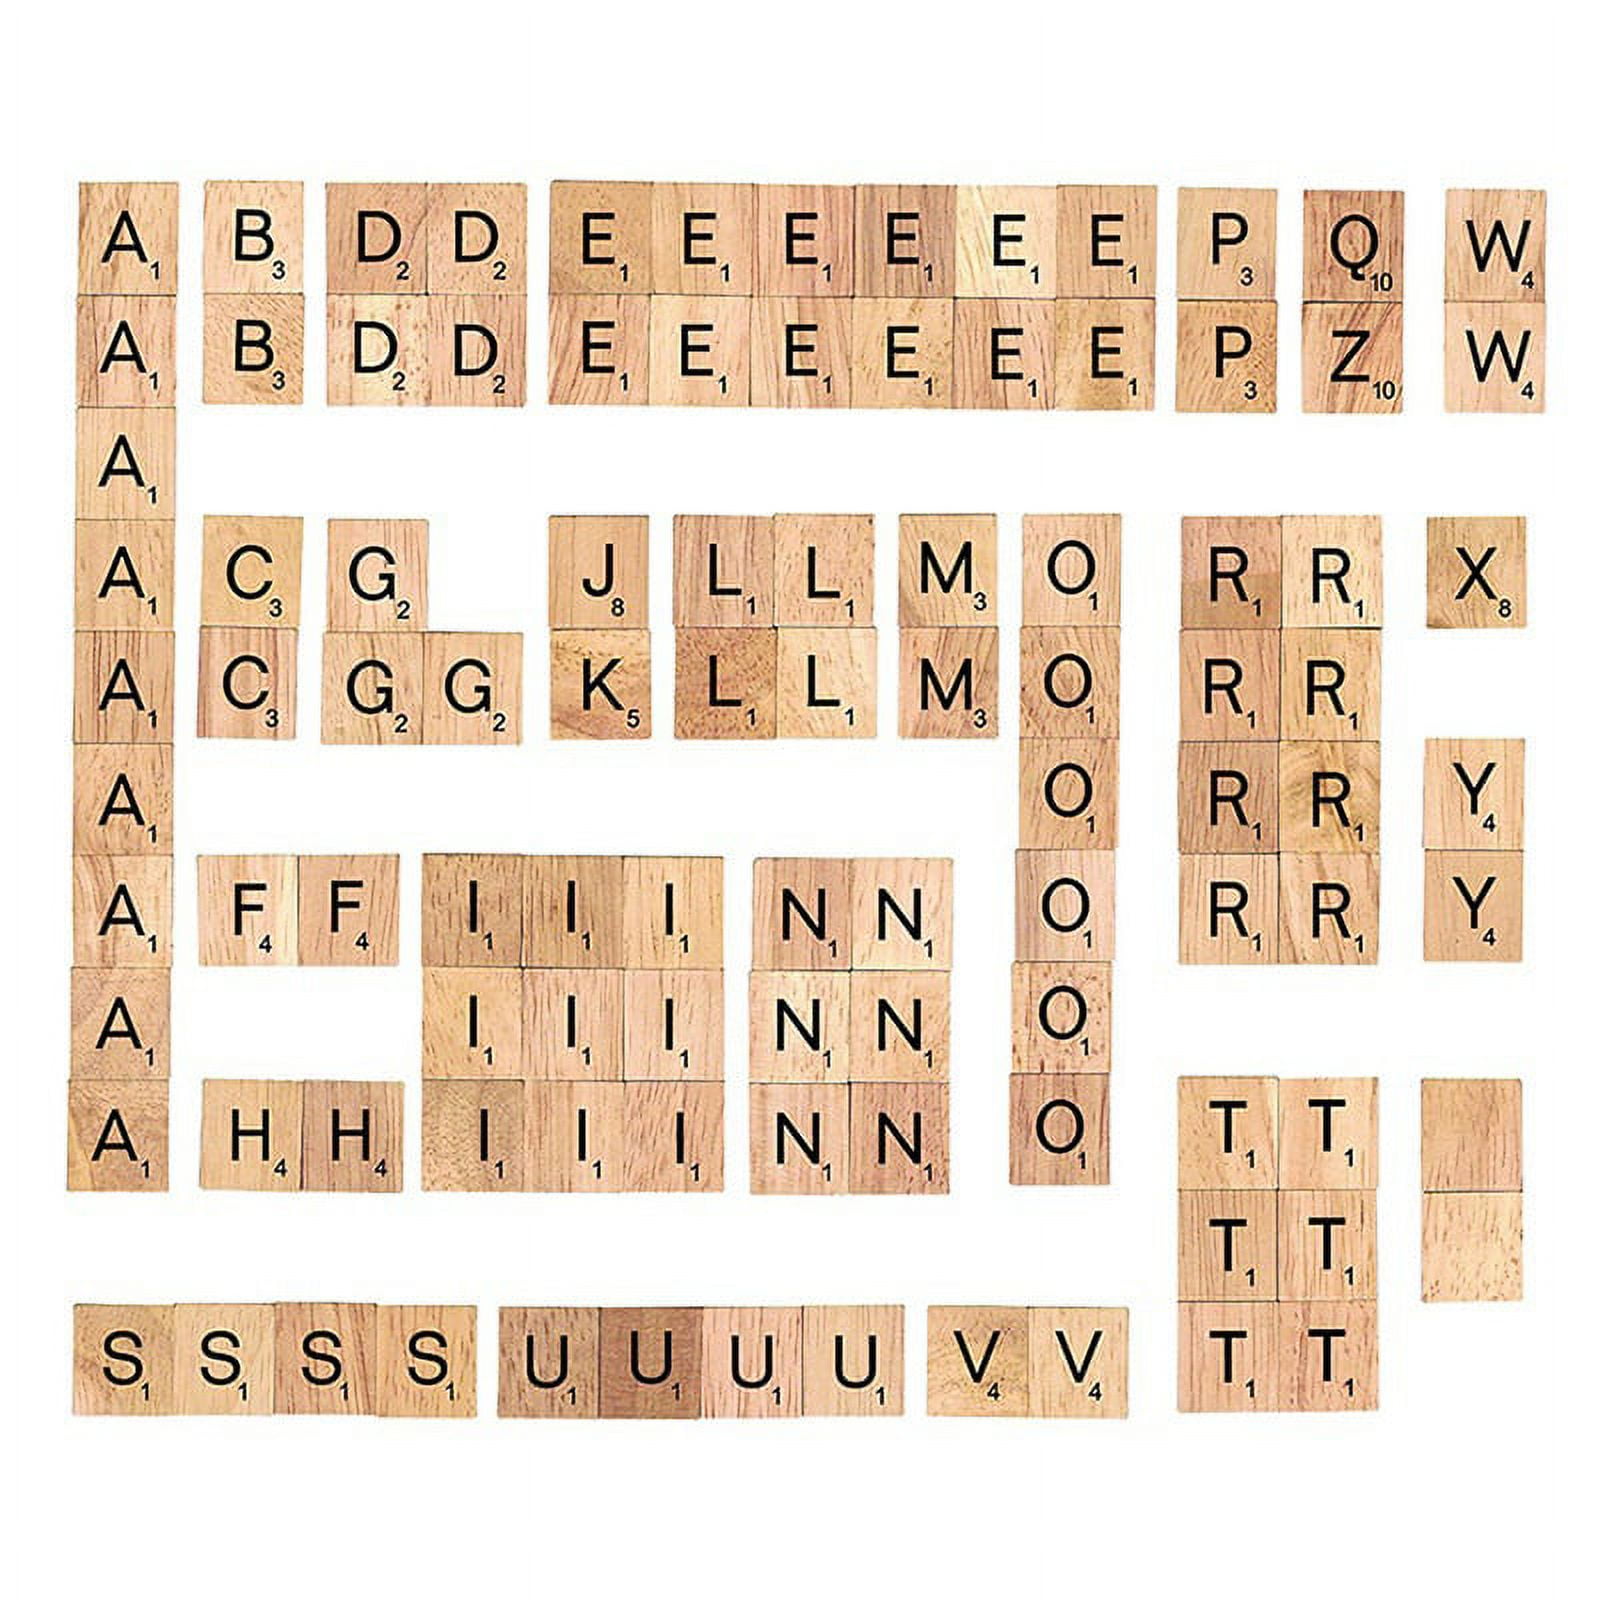 Mgaxyff 100pcs Wood Scrabble Tiles Letters Alphabet Pieces Numbers Pendants  Spelling, Scrabble Letters for Crafts, DIY Wood Gift Decoration, Making  Alphabet Coasters and Scrabble Crossword Game 